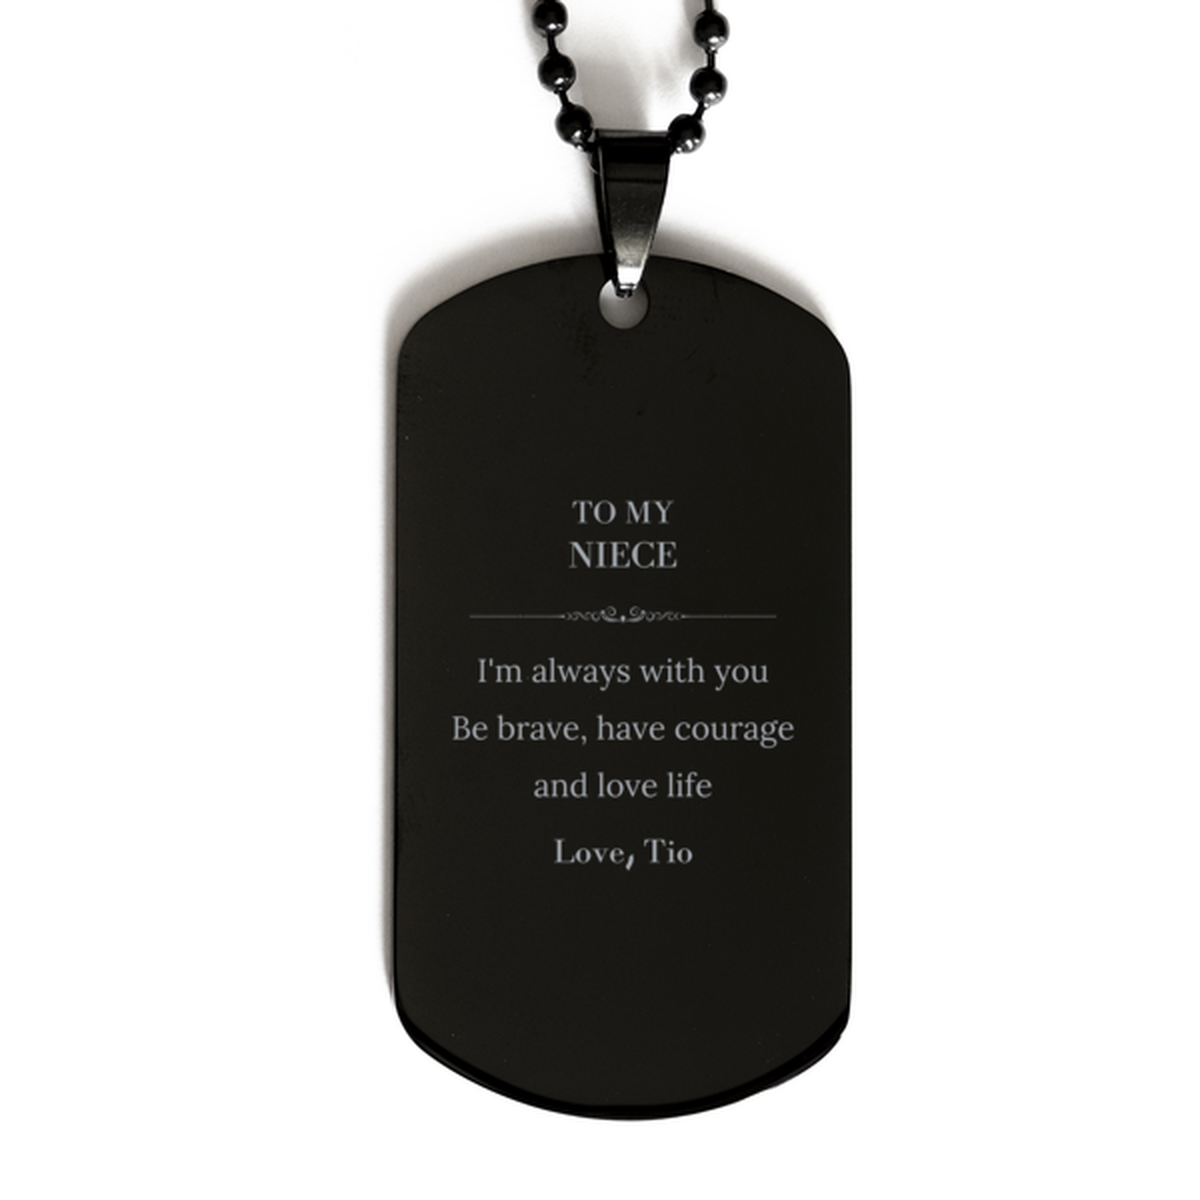 To My Niece Gifts from Tio, Unique Black Dog Tag Inspirational Christmas Birthday Graduation Gifts for Niece I'm always with you. Be brave, have courage and love life. Love, Tio